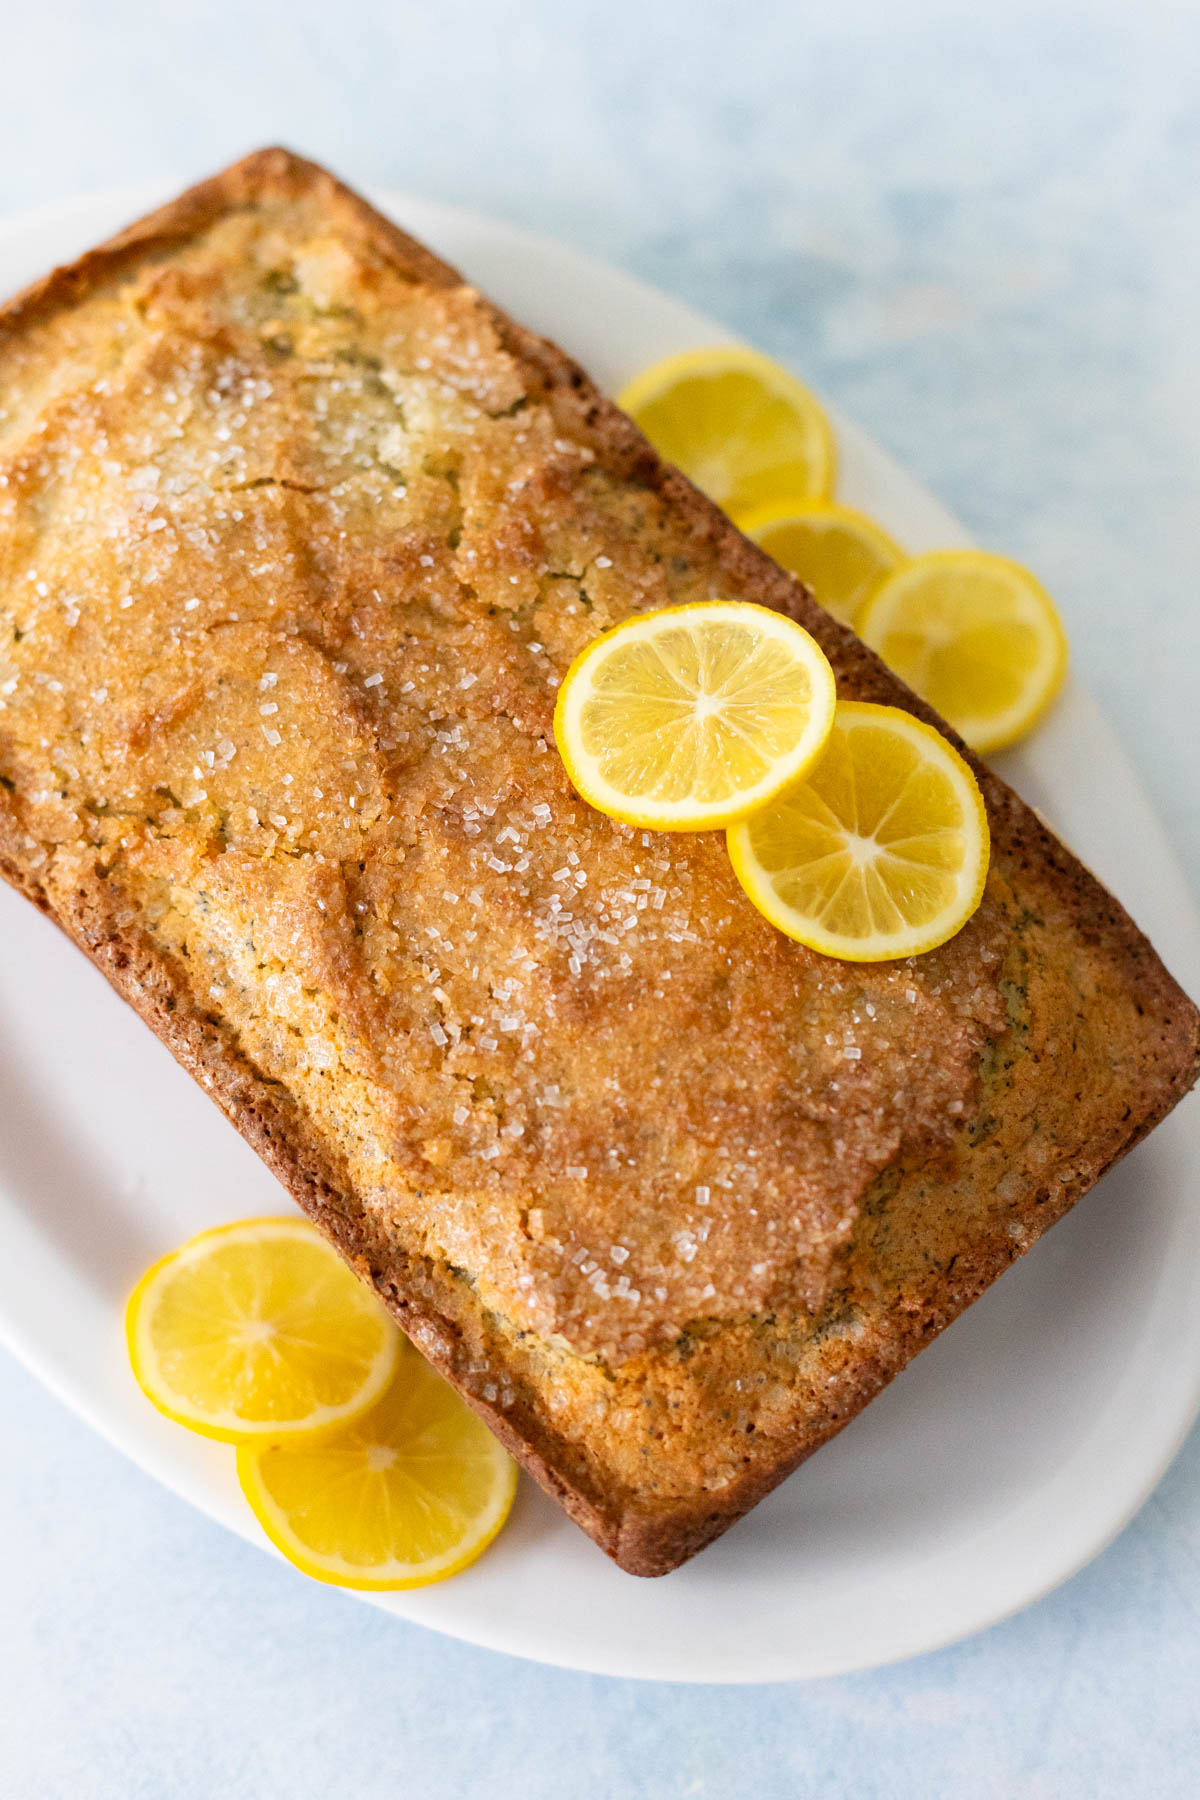 The lemon poppy seed bread is fresh from the oven and a pretty golden brown color all around. Sliced lemons have been added for garnish.